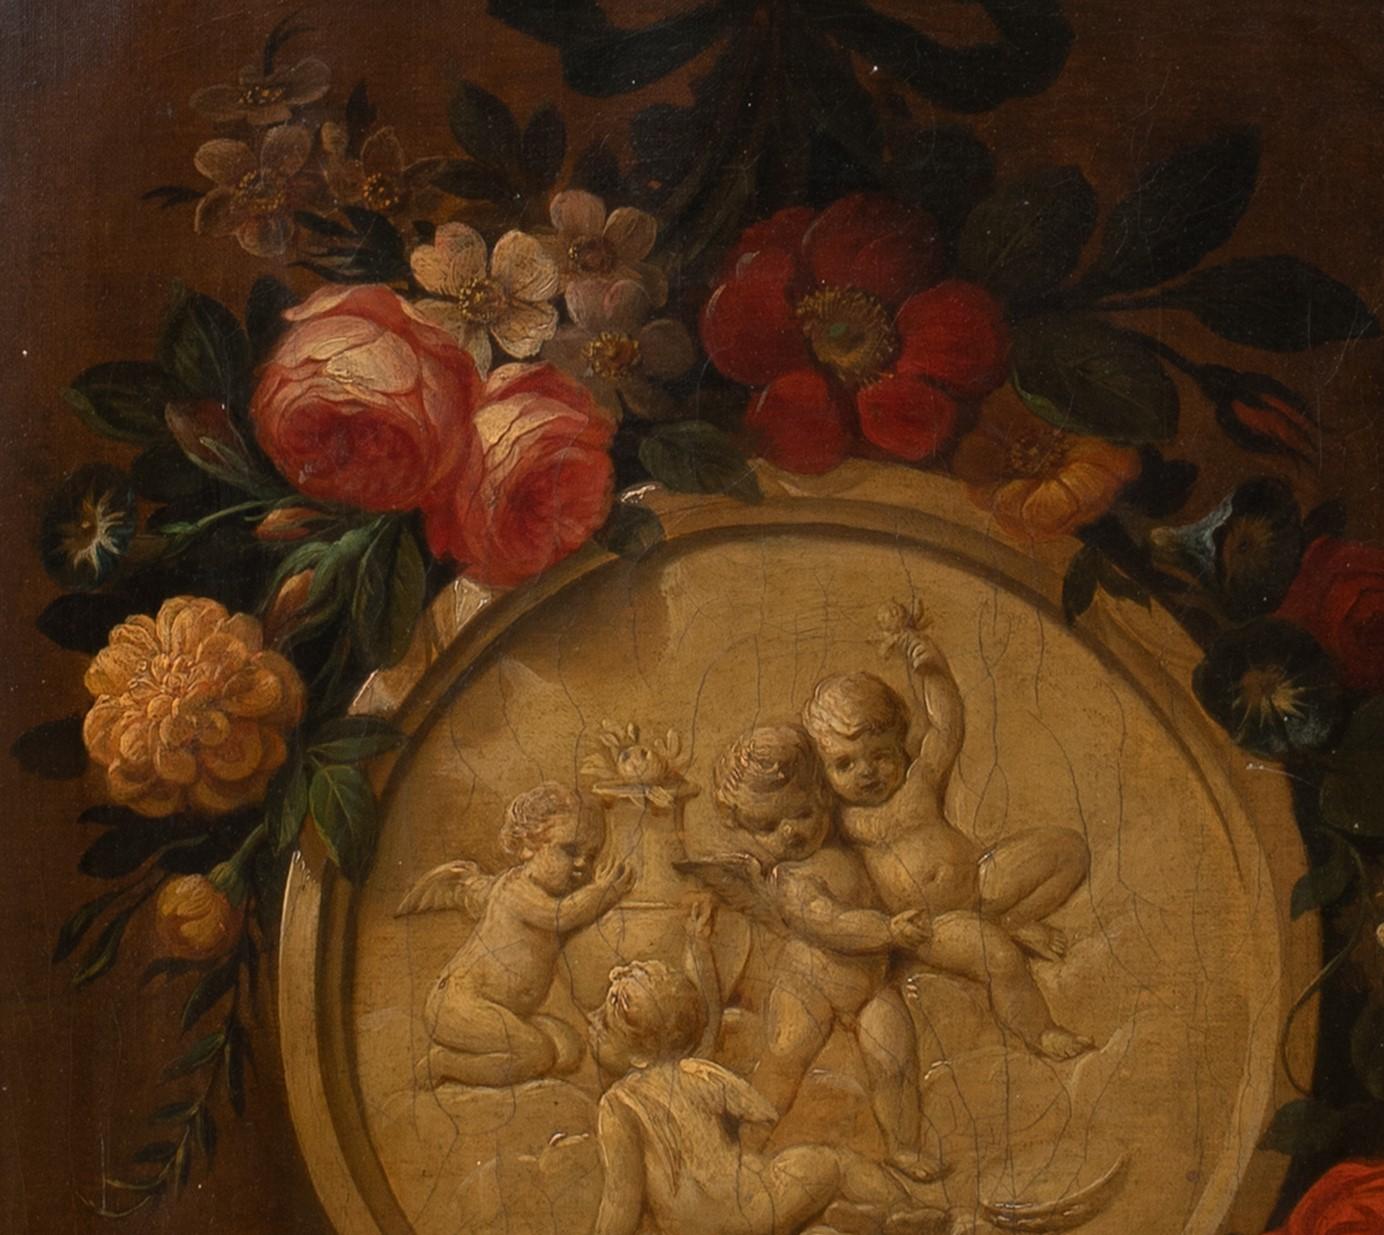 Still Life of Roses & Marble Cherubs On A Mantle 18th Century

Dutch School

Fine 18th Century Dutch School still life study of roses and a marble plaque with cherubs on a mantle, oil on canvas. Superb quality study by an accomplished hand. Could